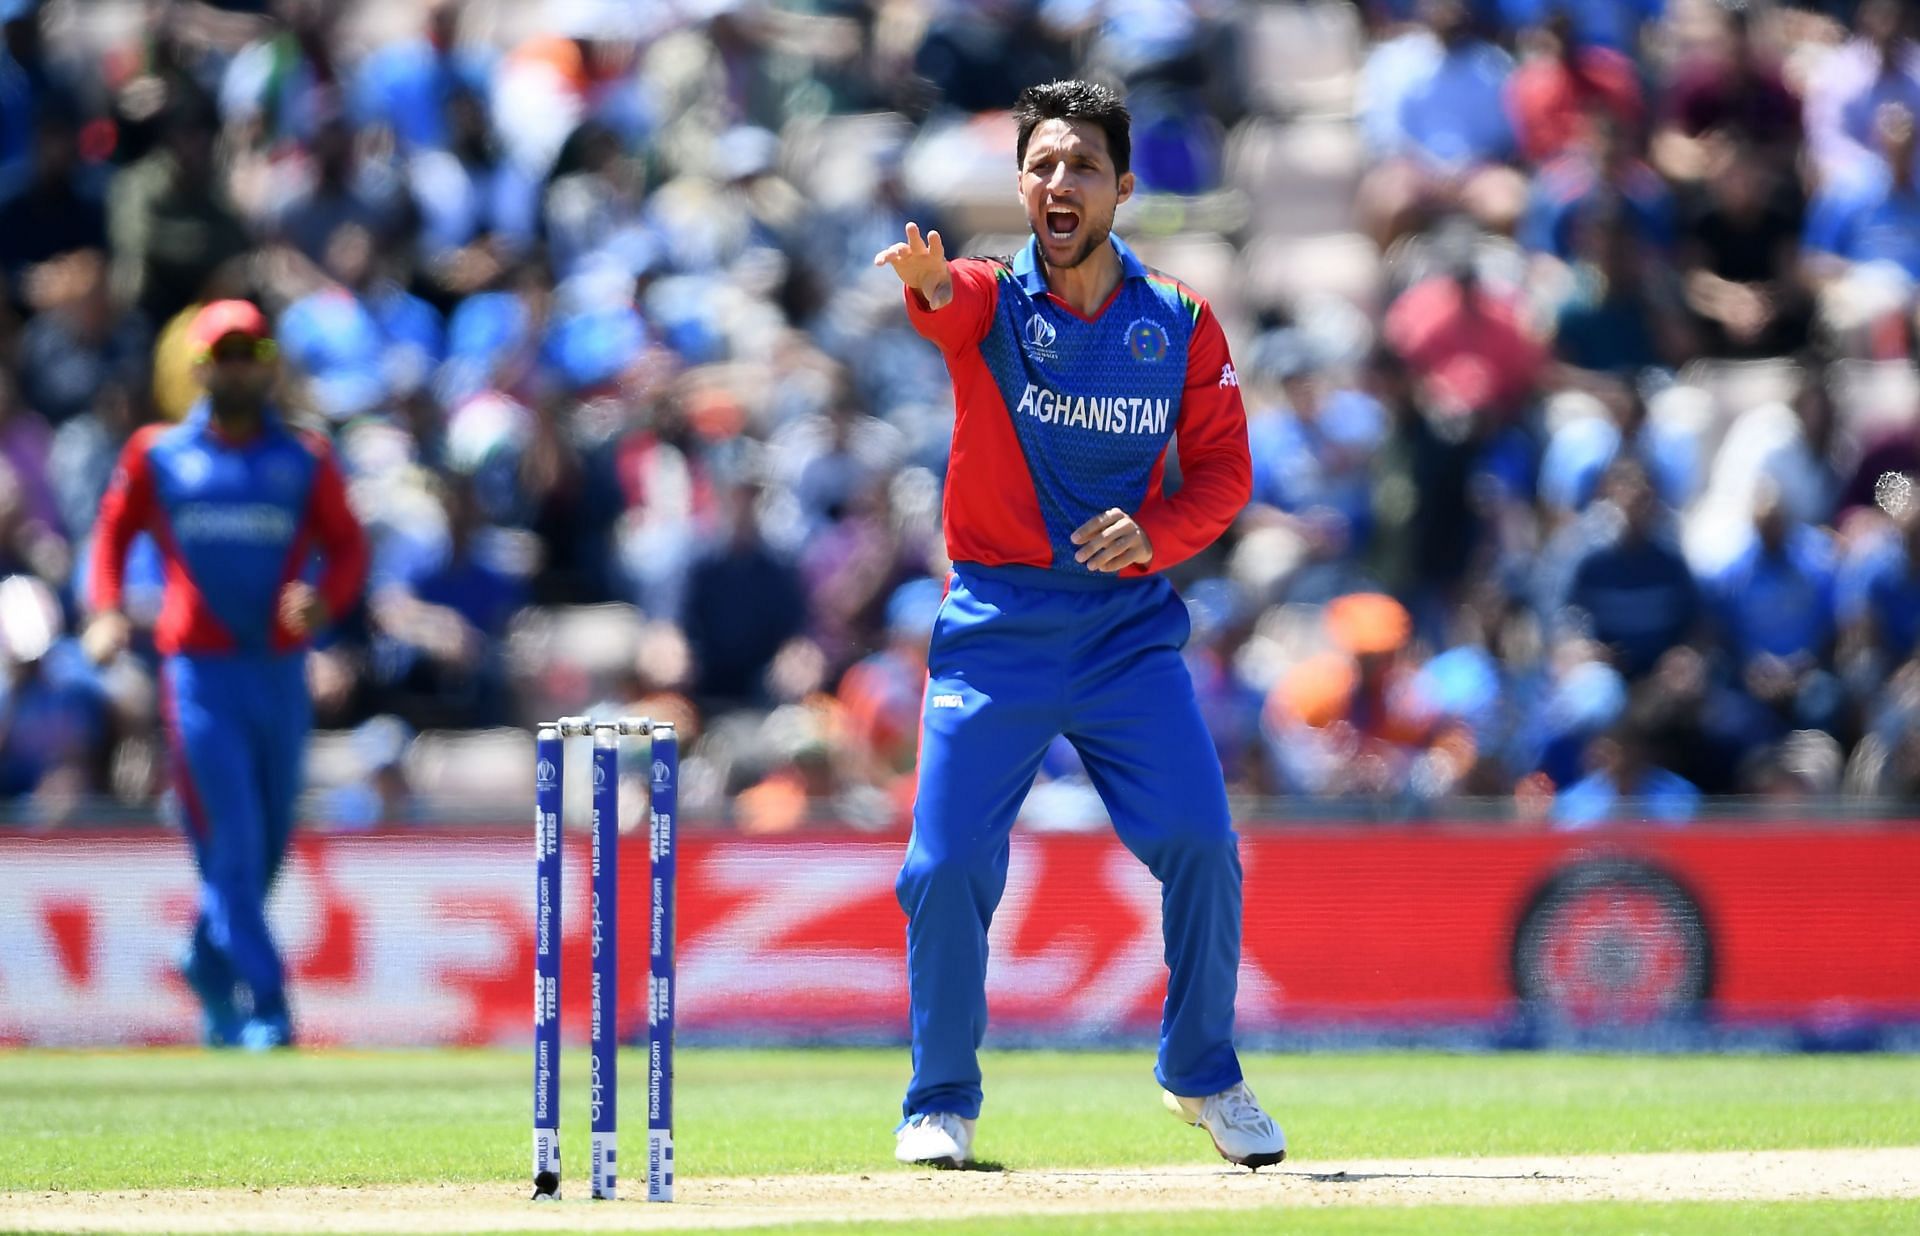 India v Afghanistan - ICC Cricket World Cup 2019 (Image Courtesy: Getty Images)